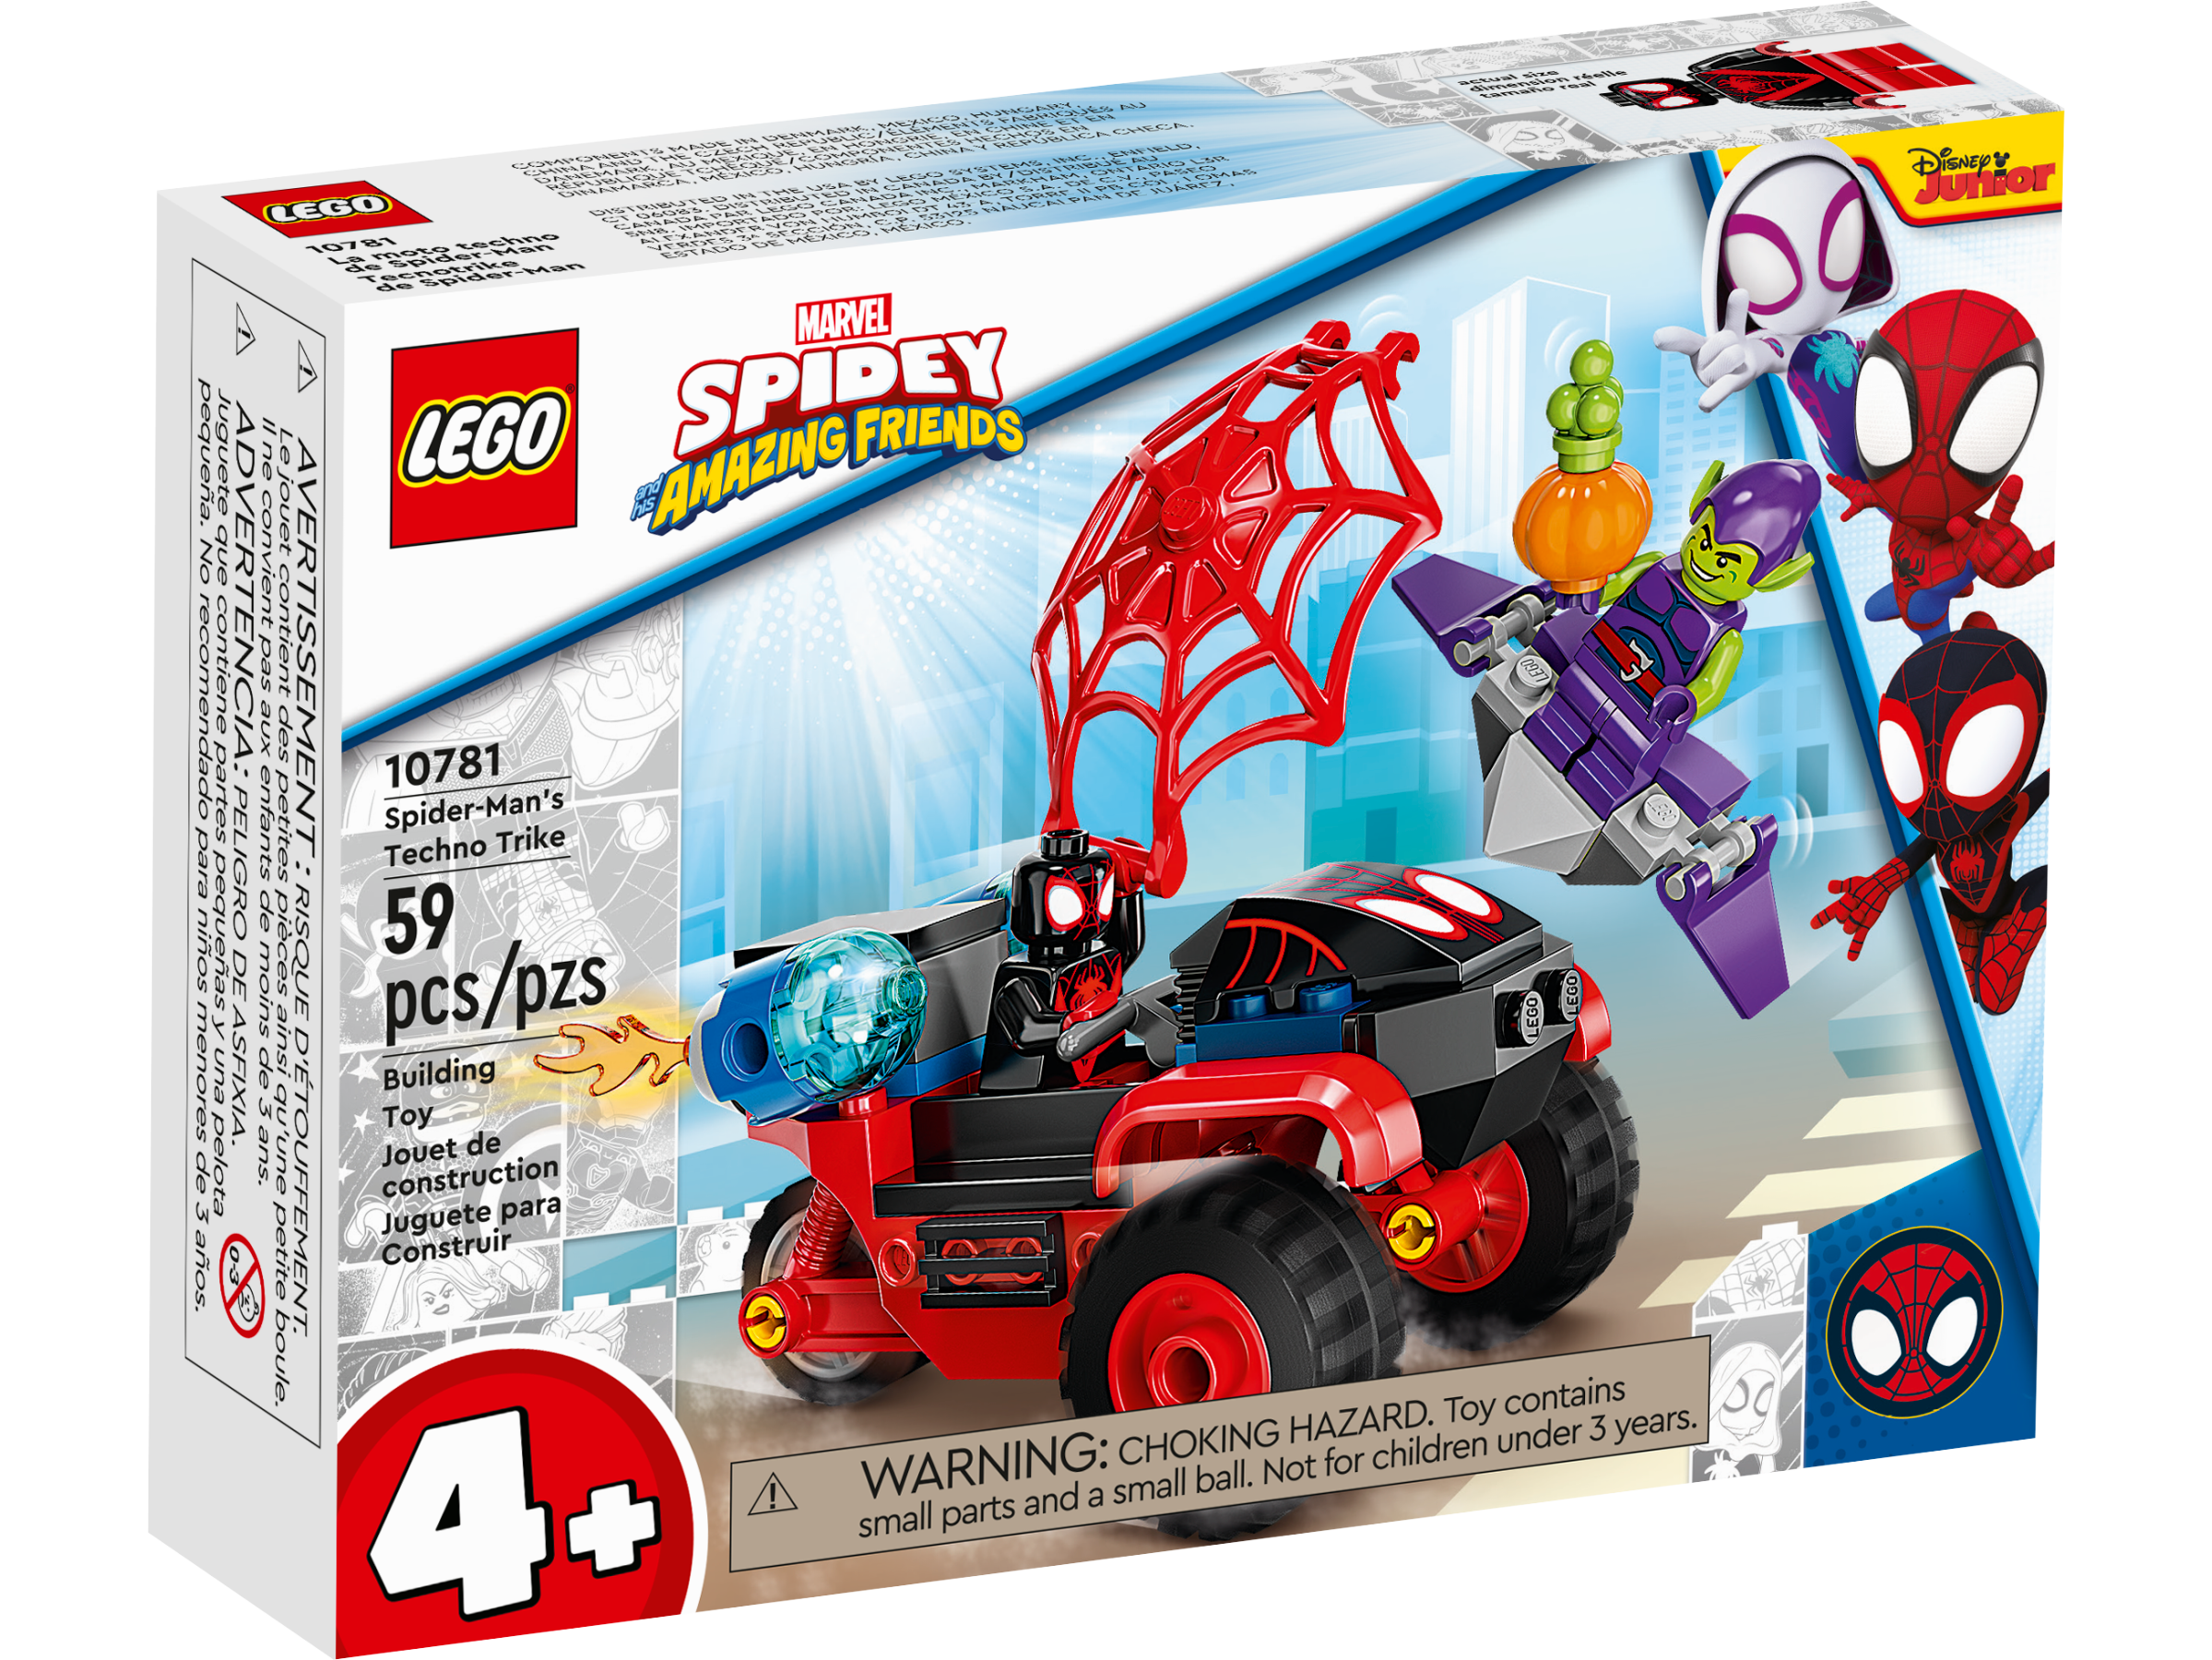 Who Love Super-Hero Play LEGO Marvel Spidey and His Amazing Friends Miles Morales 59 Pieces Spider-Man’s Techno Trike 10781 Building Kit; Miles Morales Set Makes a Fun Gift Idea for Kids Aged 4 